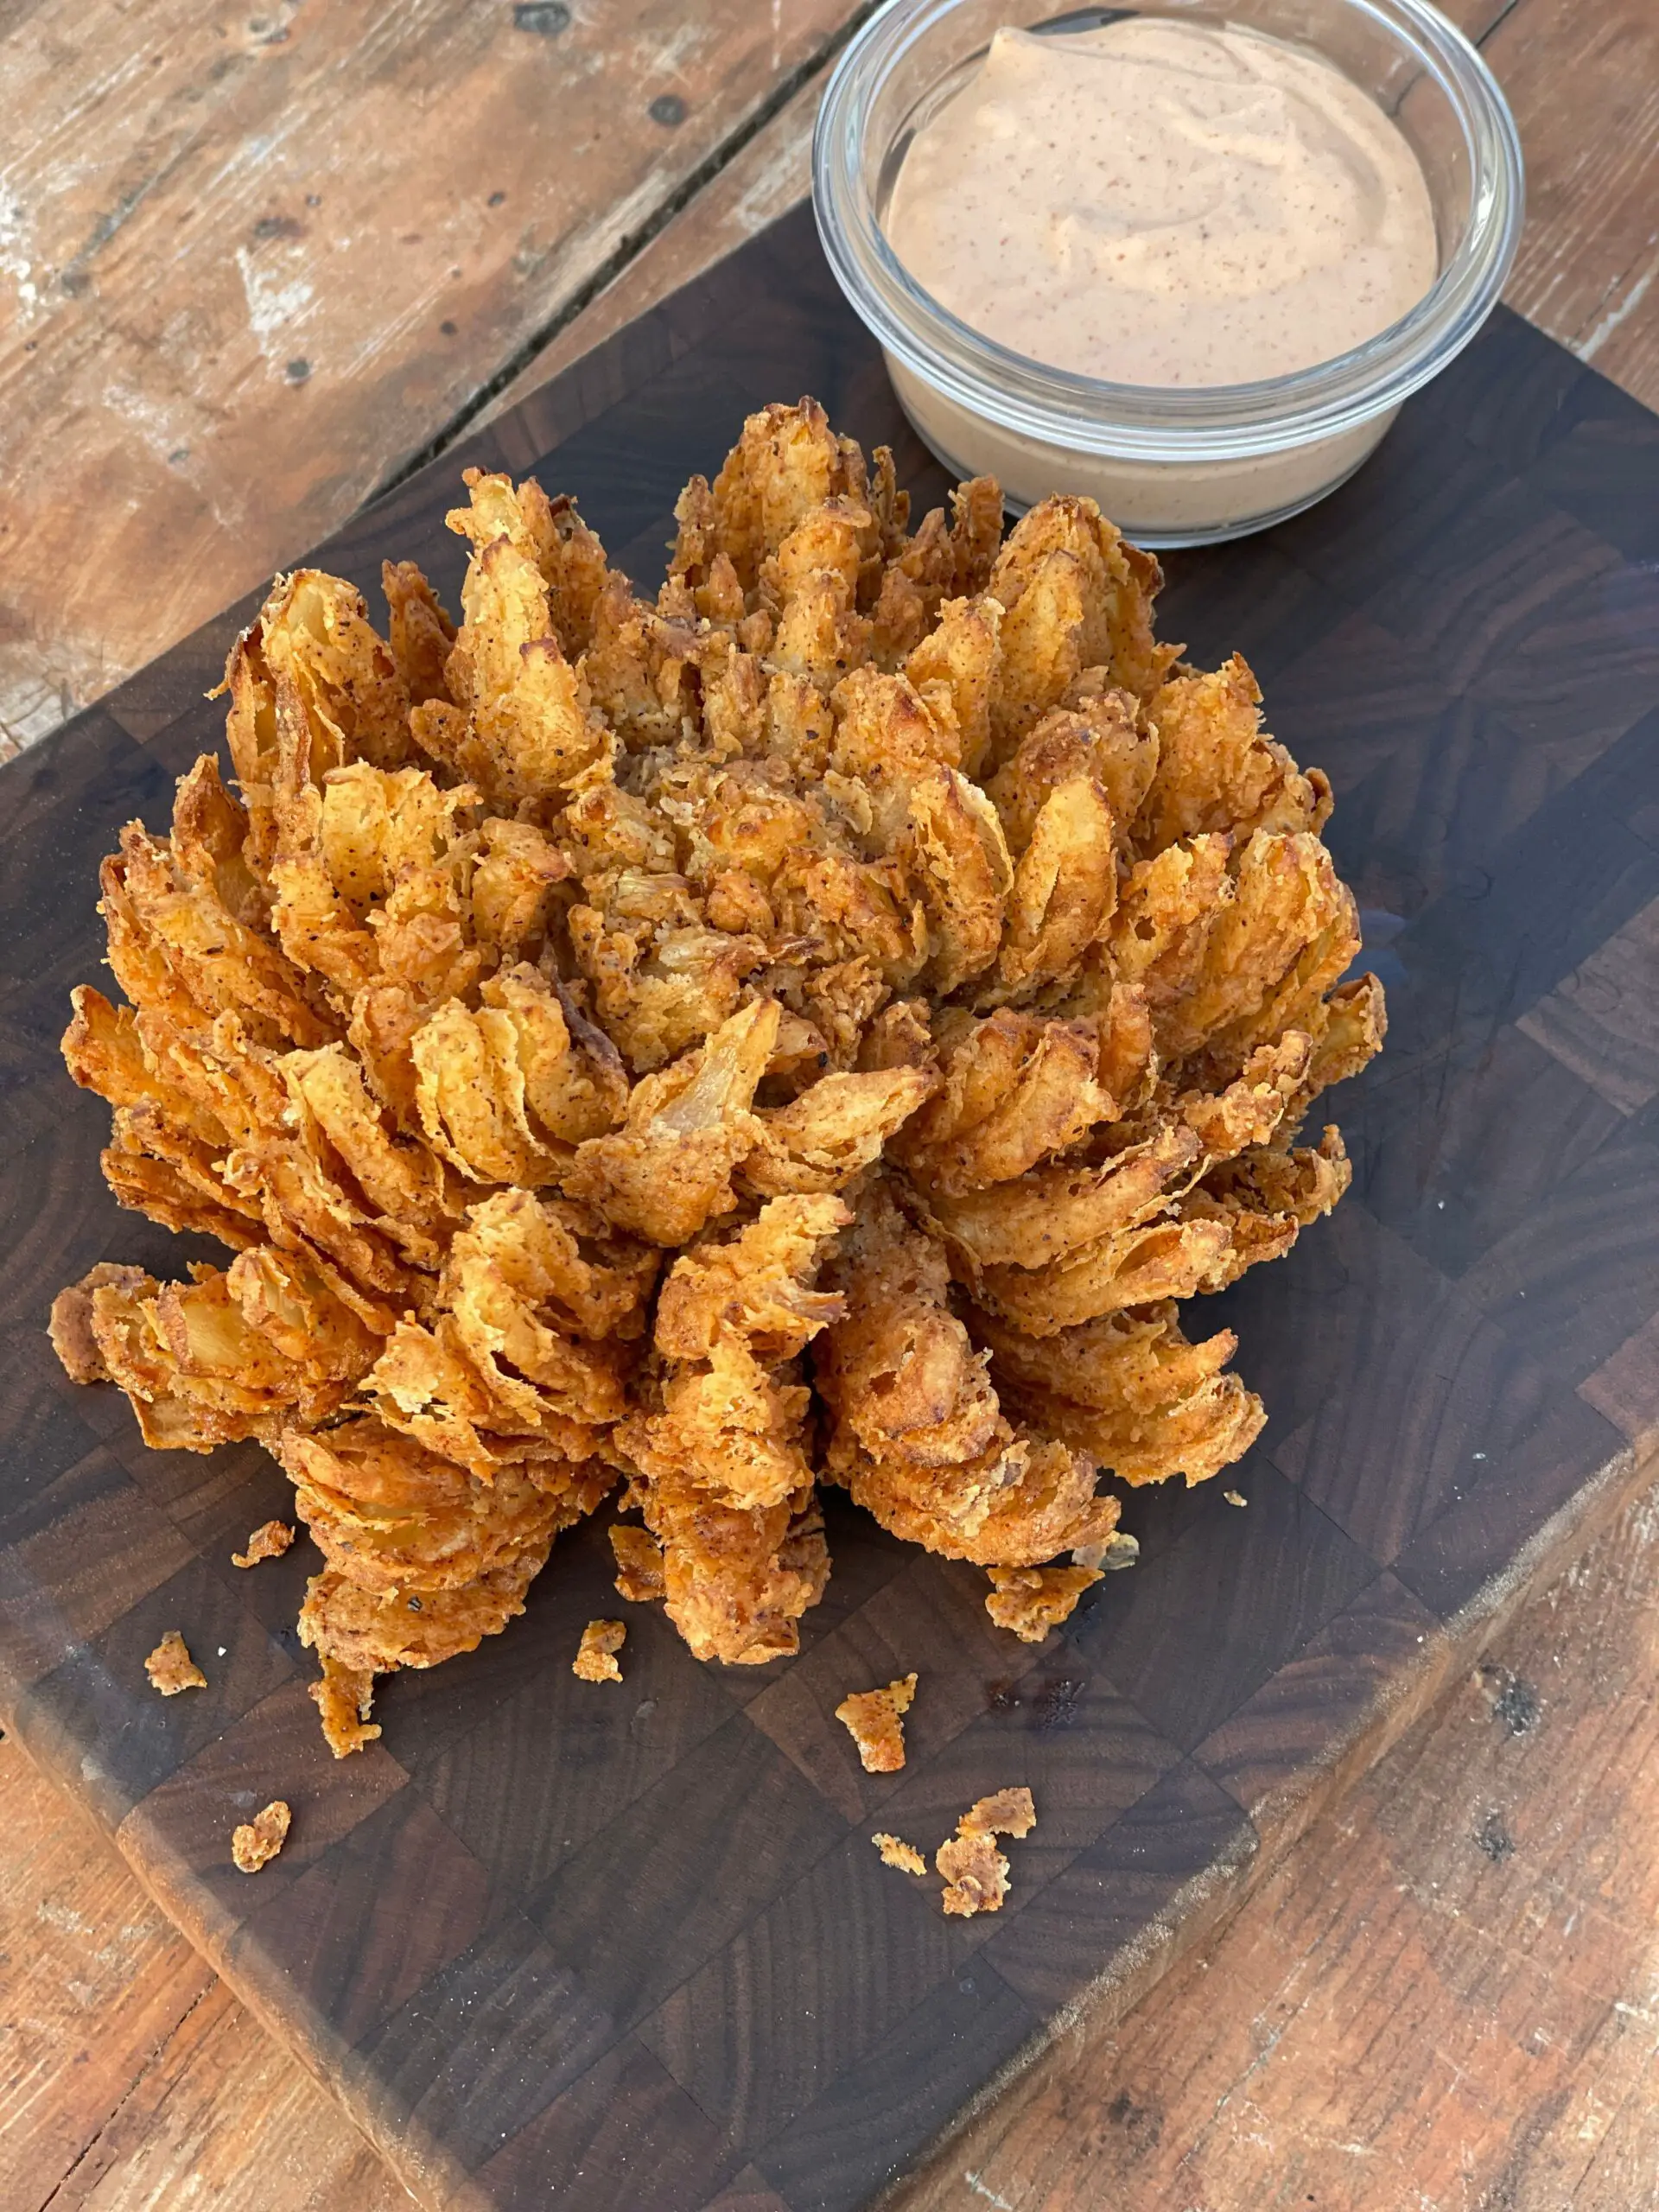 How To Make a Blooming Onion (with video)